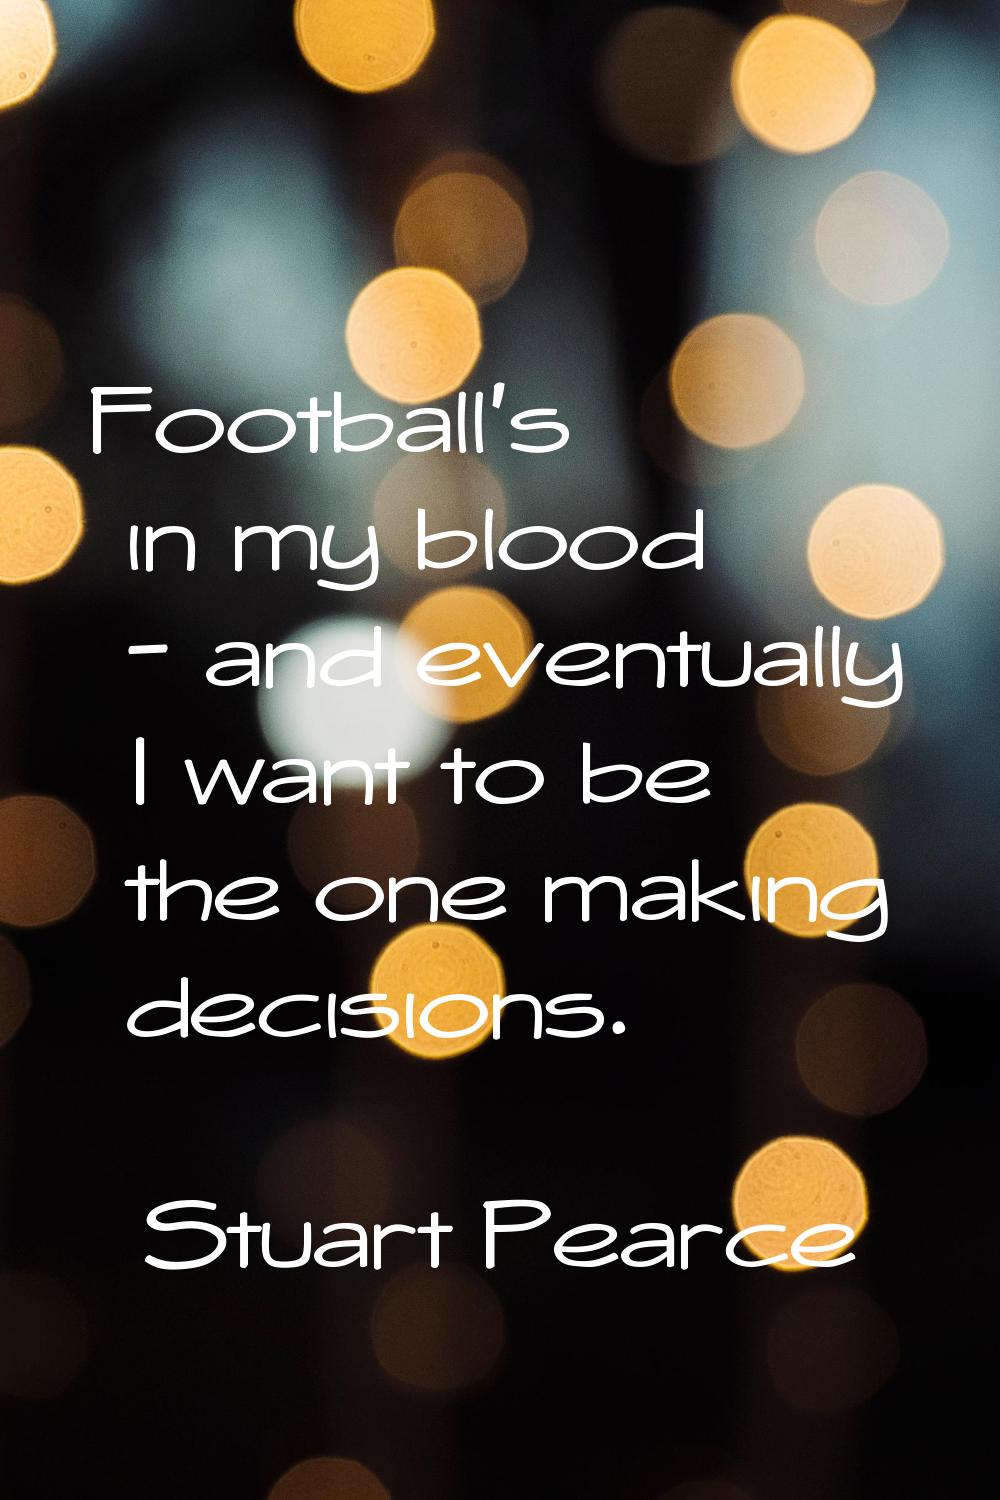 Football's in my blood - and eventually I want to be the one making decisions.